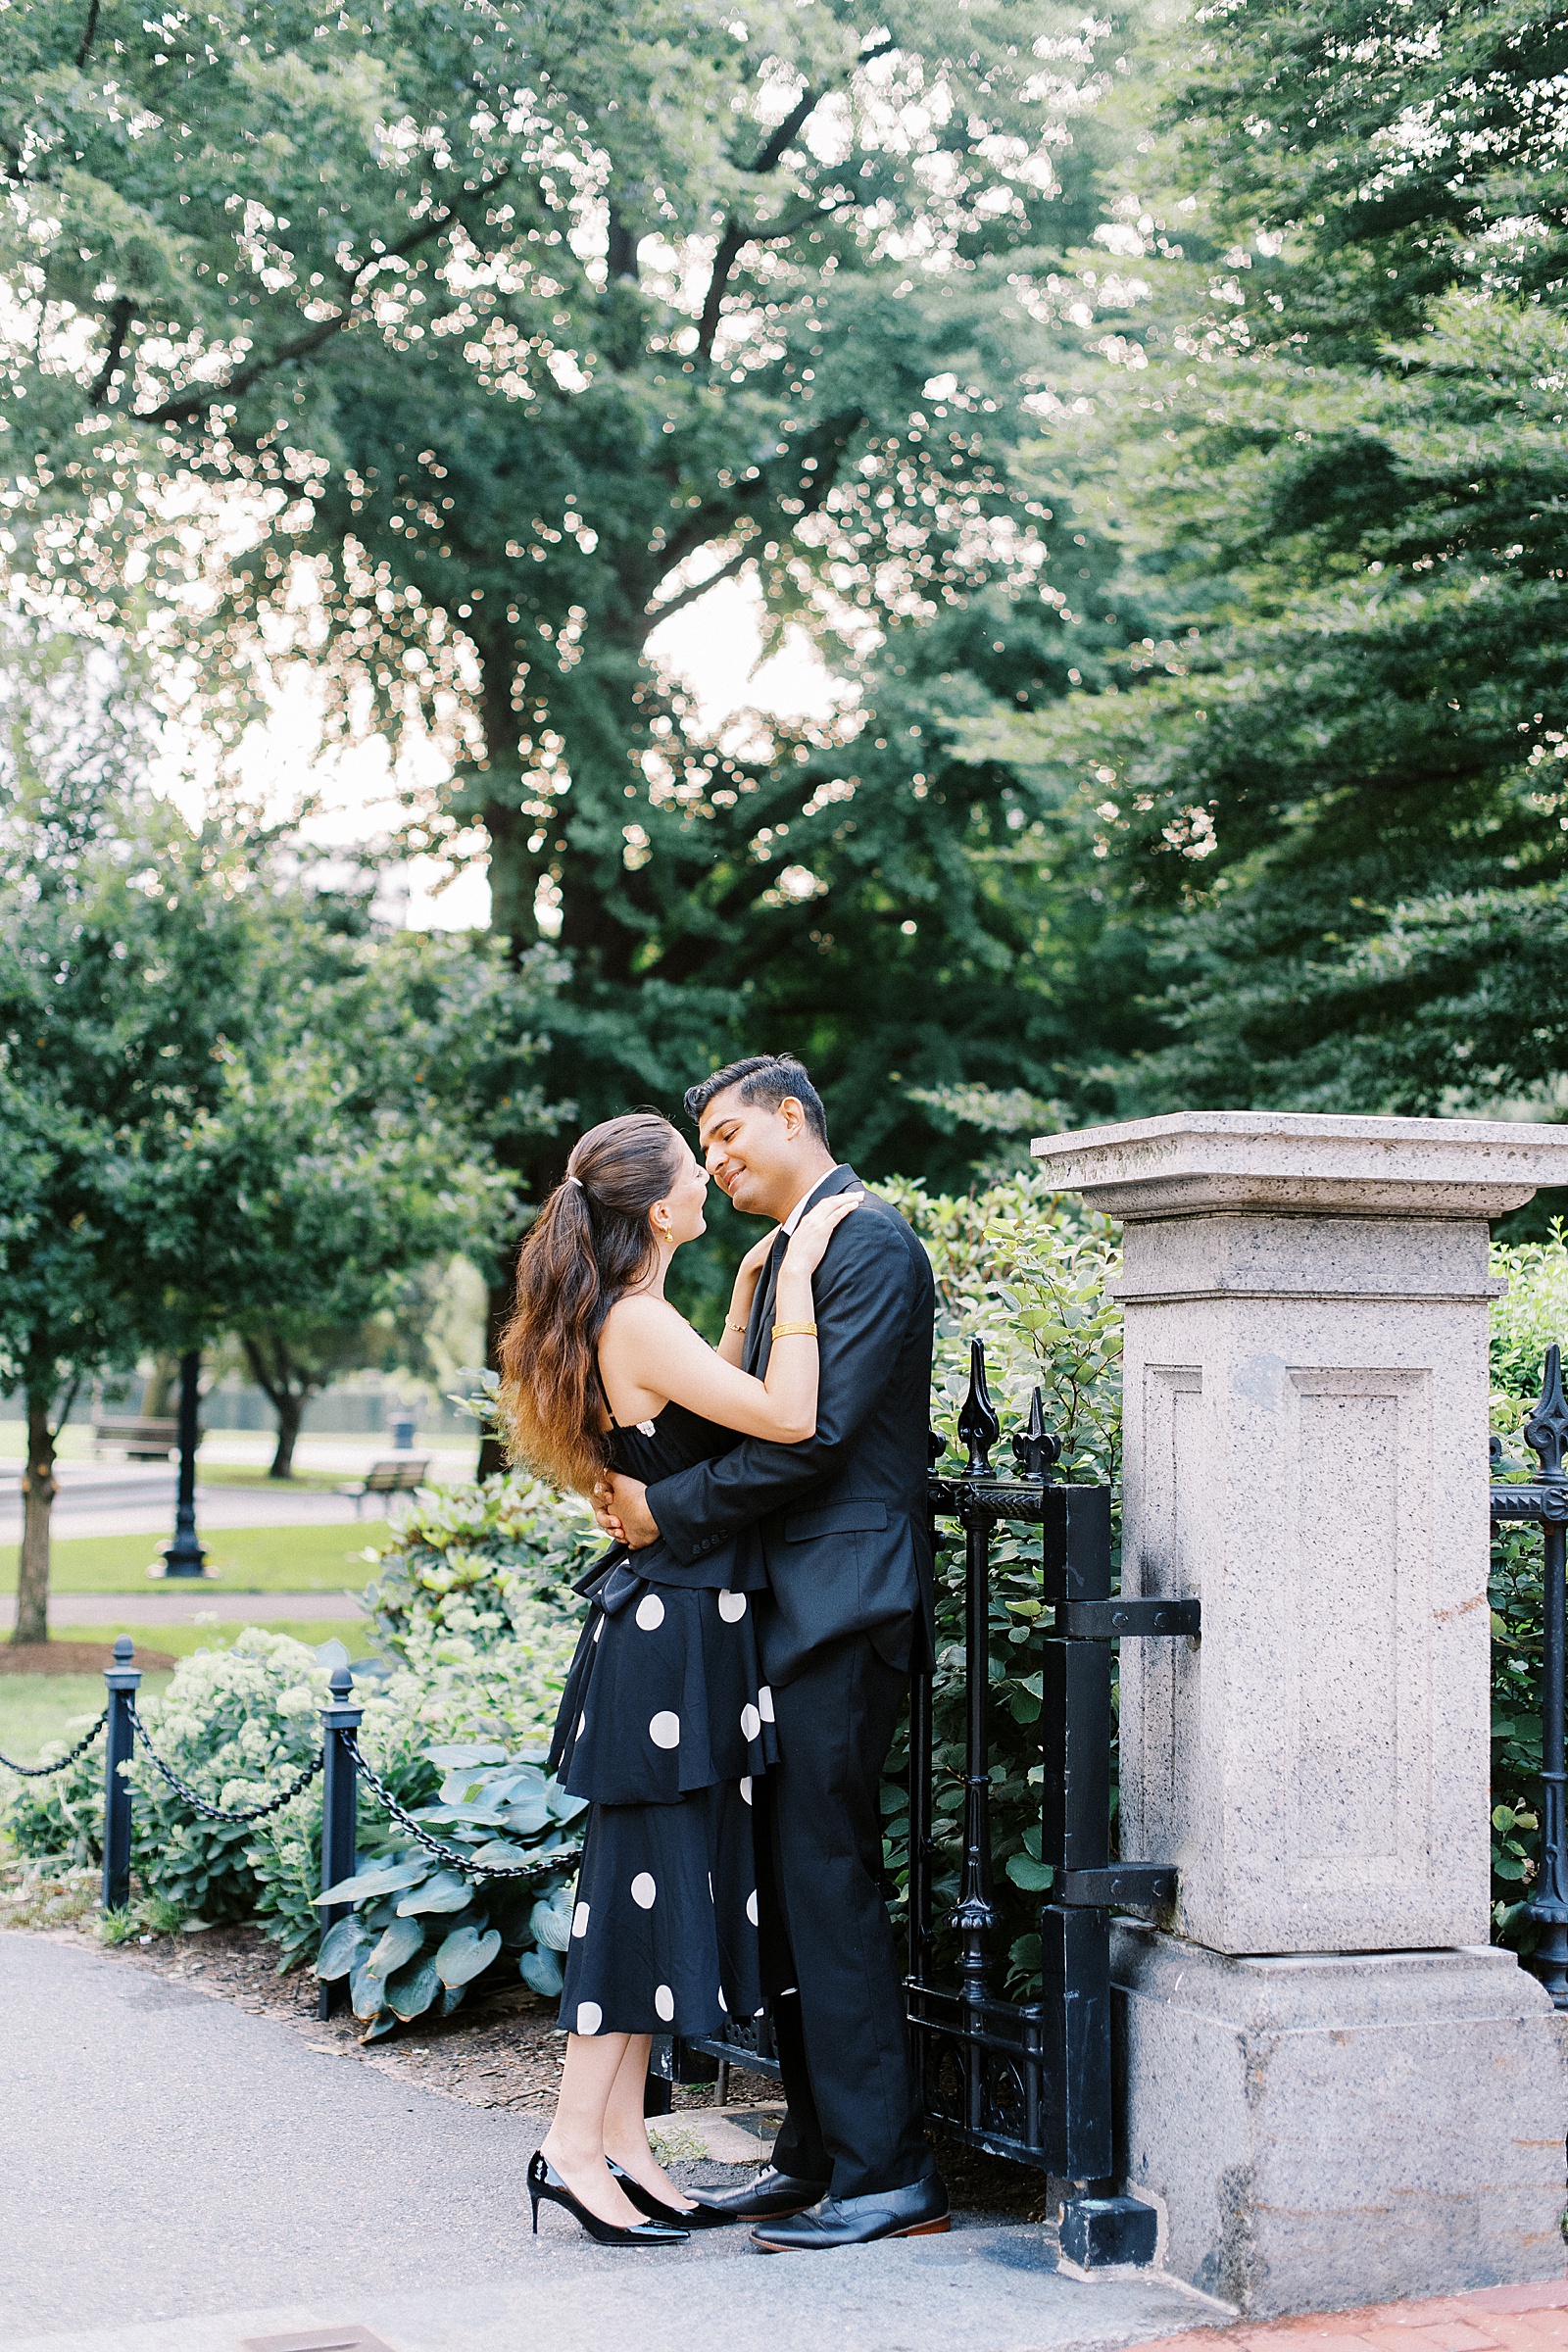 Man and woman in formal wear about to kiss at public garden engagement session